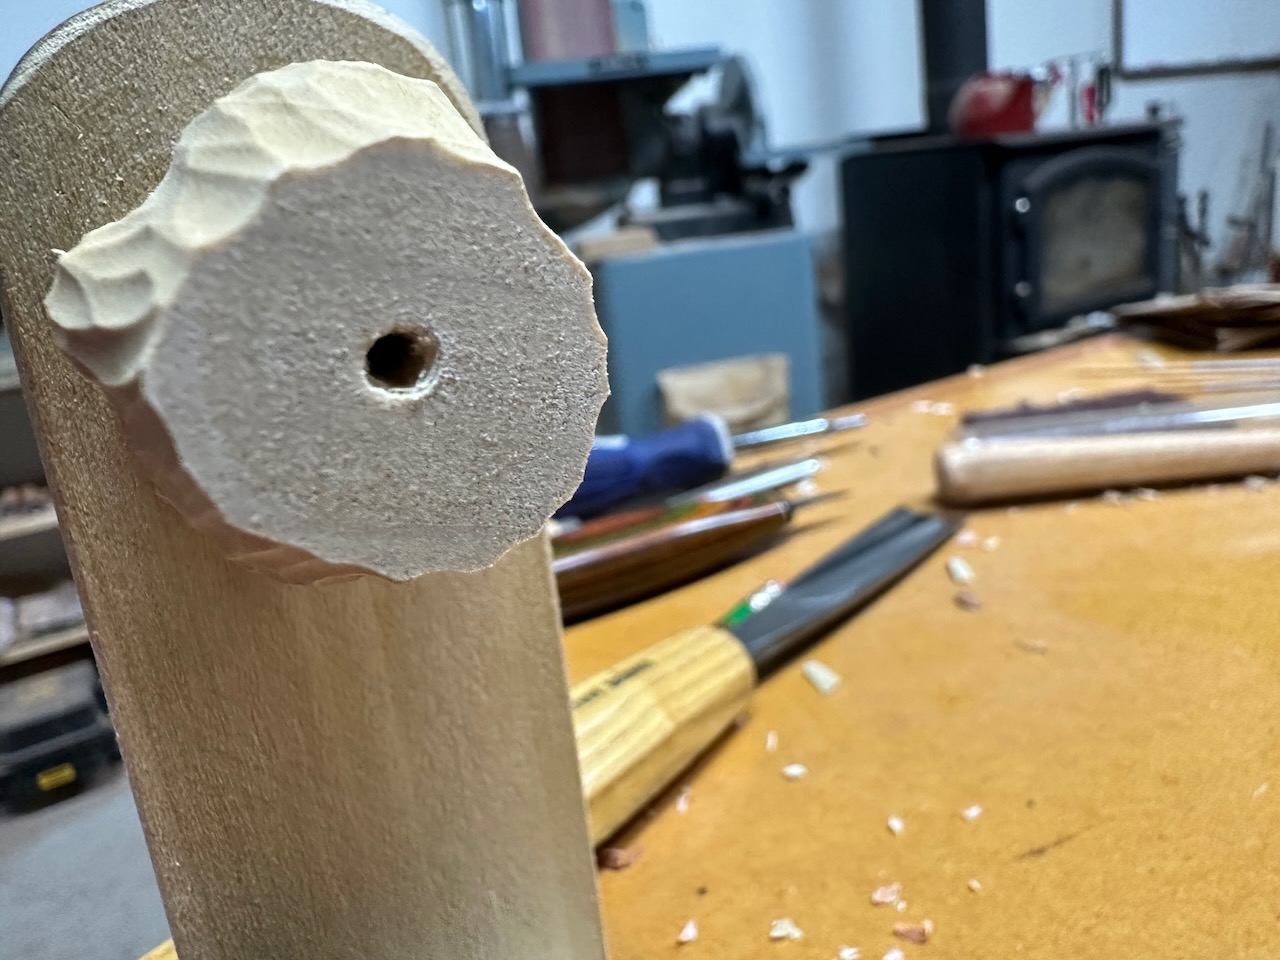 BEAD BLANK (PARTLY CARVED) SHOWING HOLE DRILLED THROUGH CENTER. PHOTO BY AUTHOR.